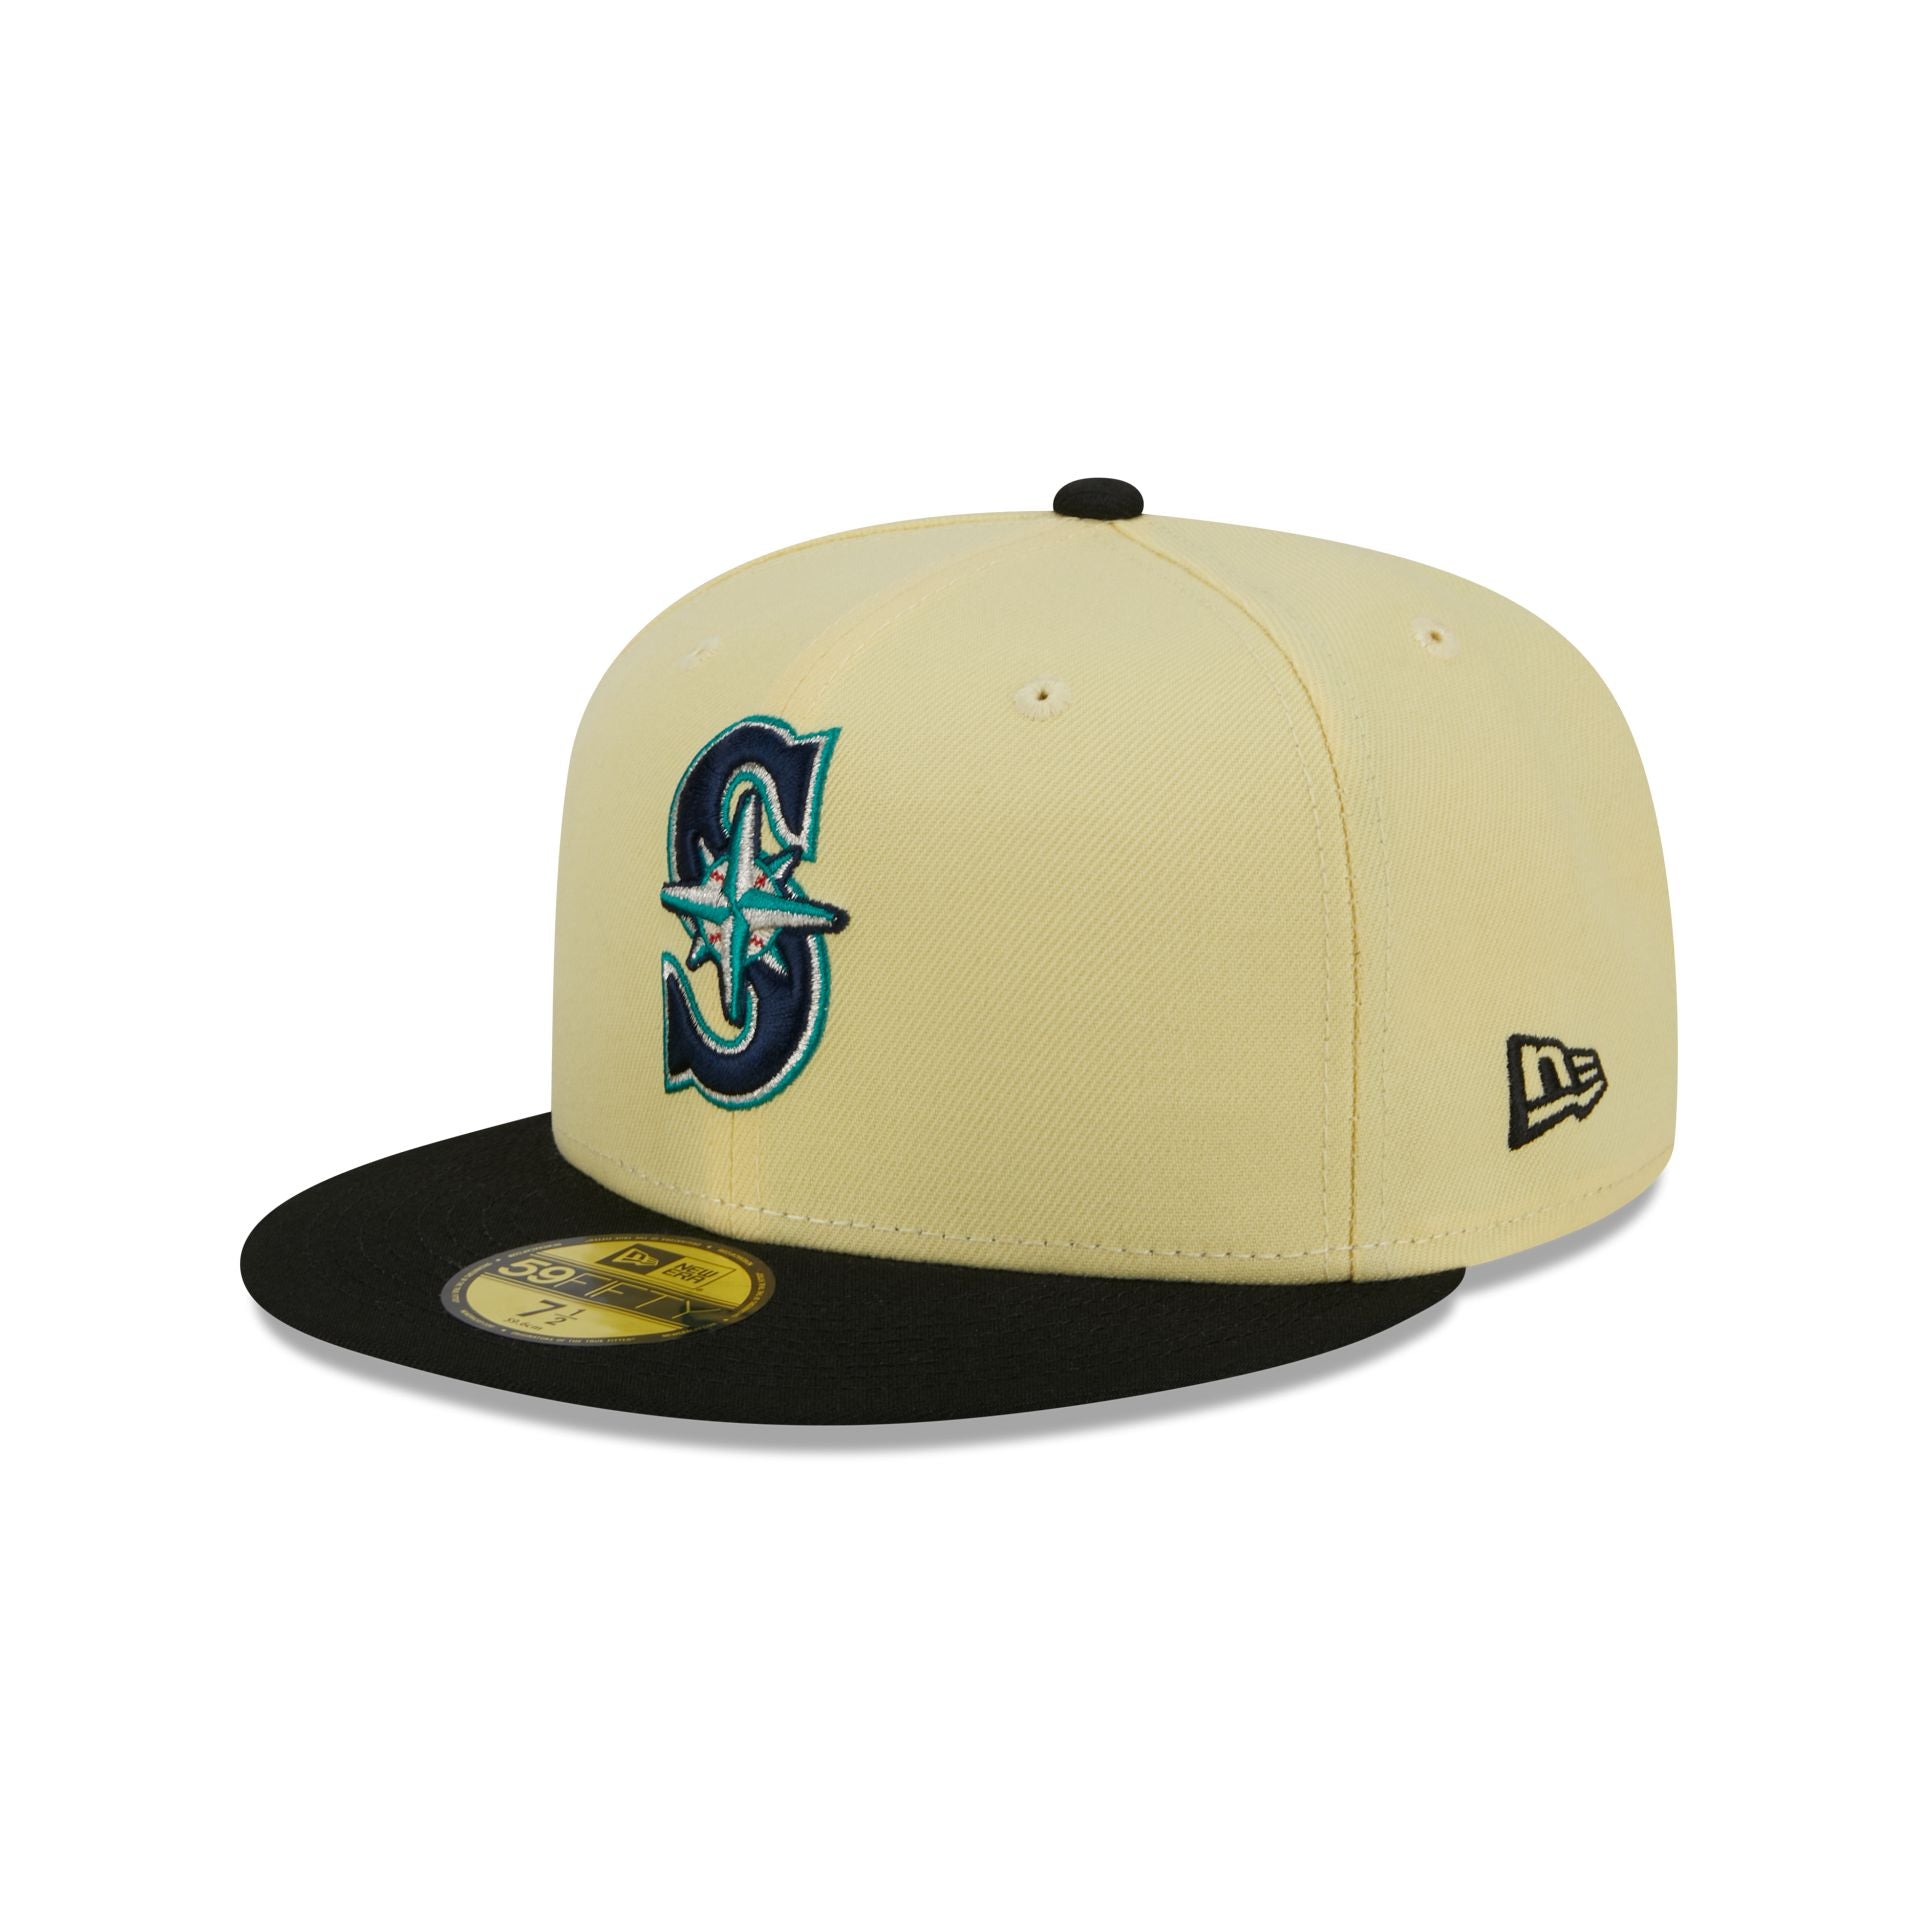 Check out New Era's 2023 Seattle Mariners Spring Training hat